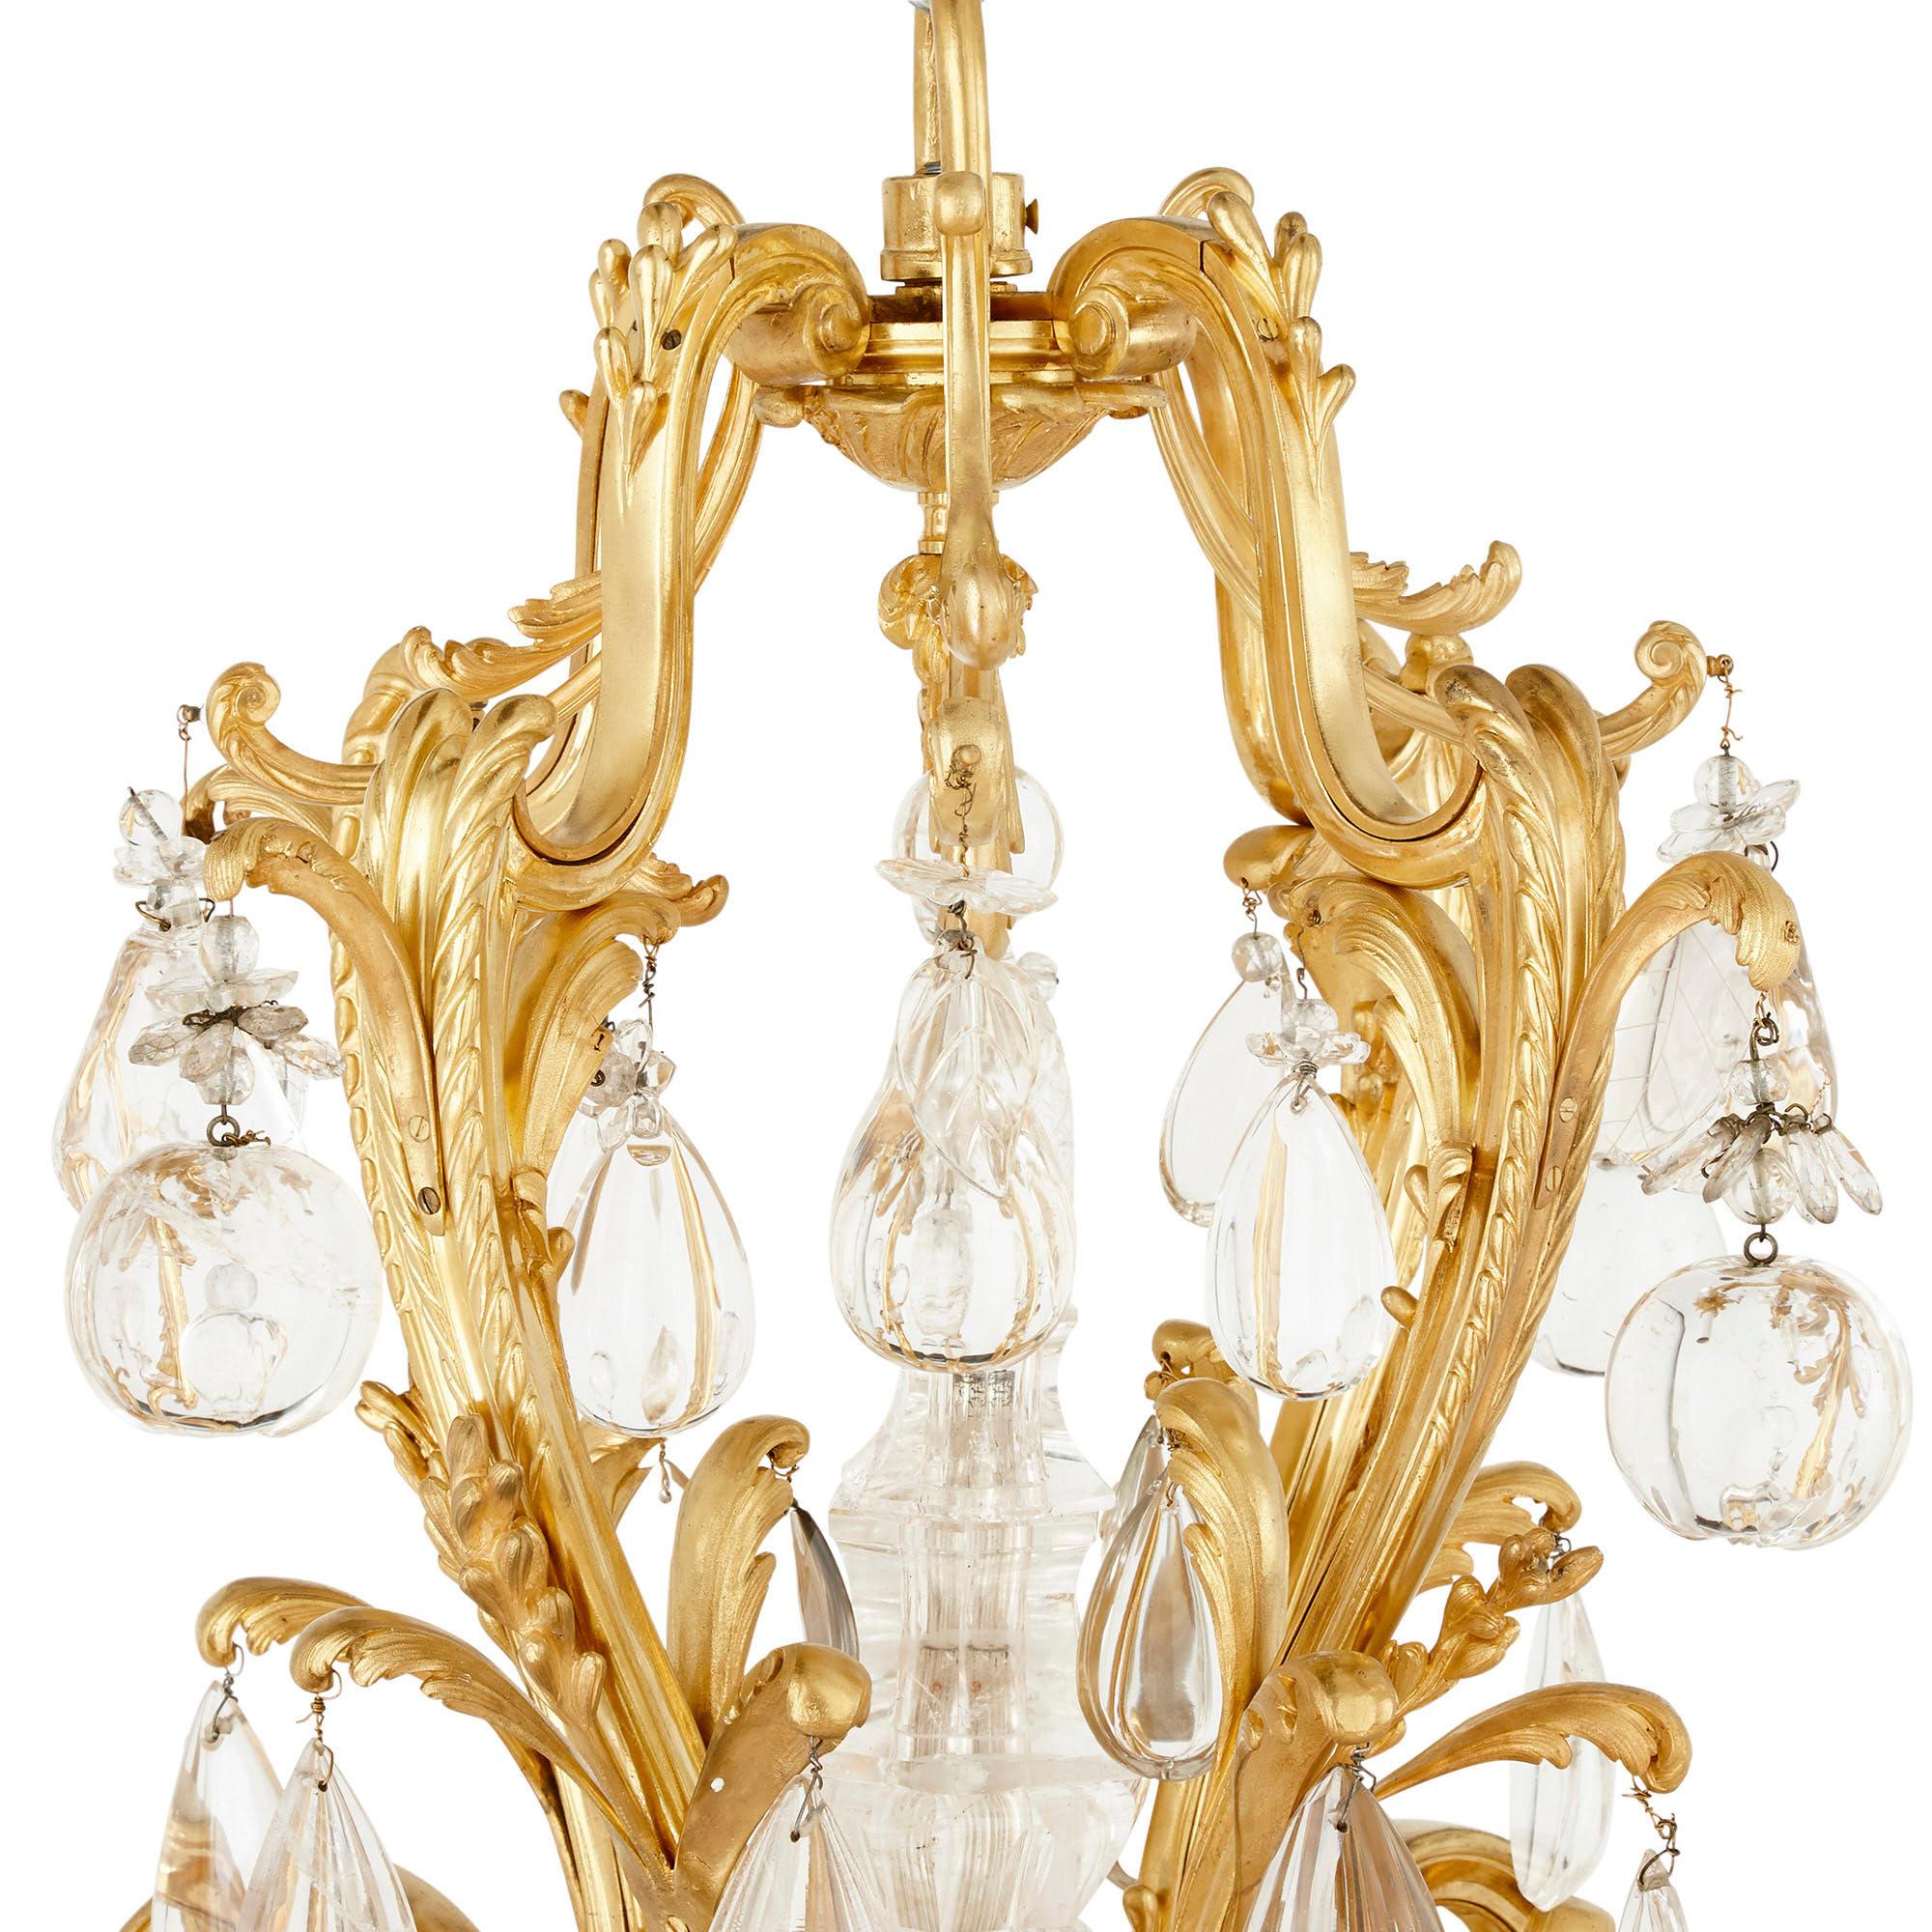 Rock Crystal Antique Rococo Style Ormolu and Cut Glass Twelve-Light Chandelier For Sale